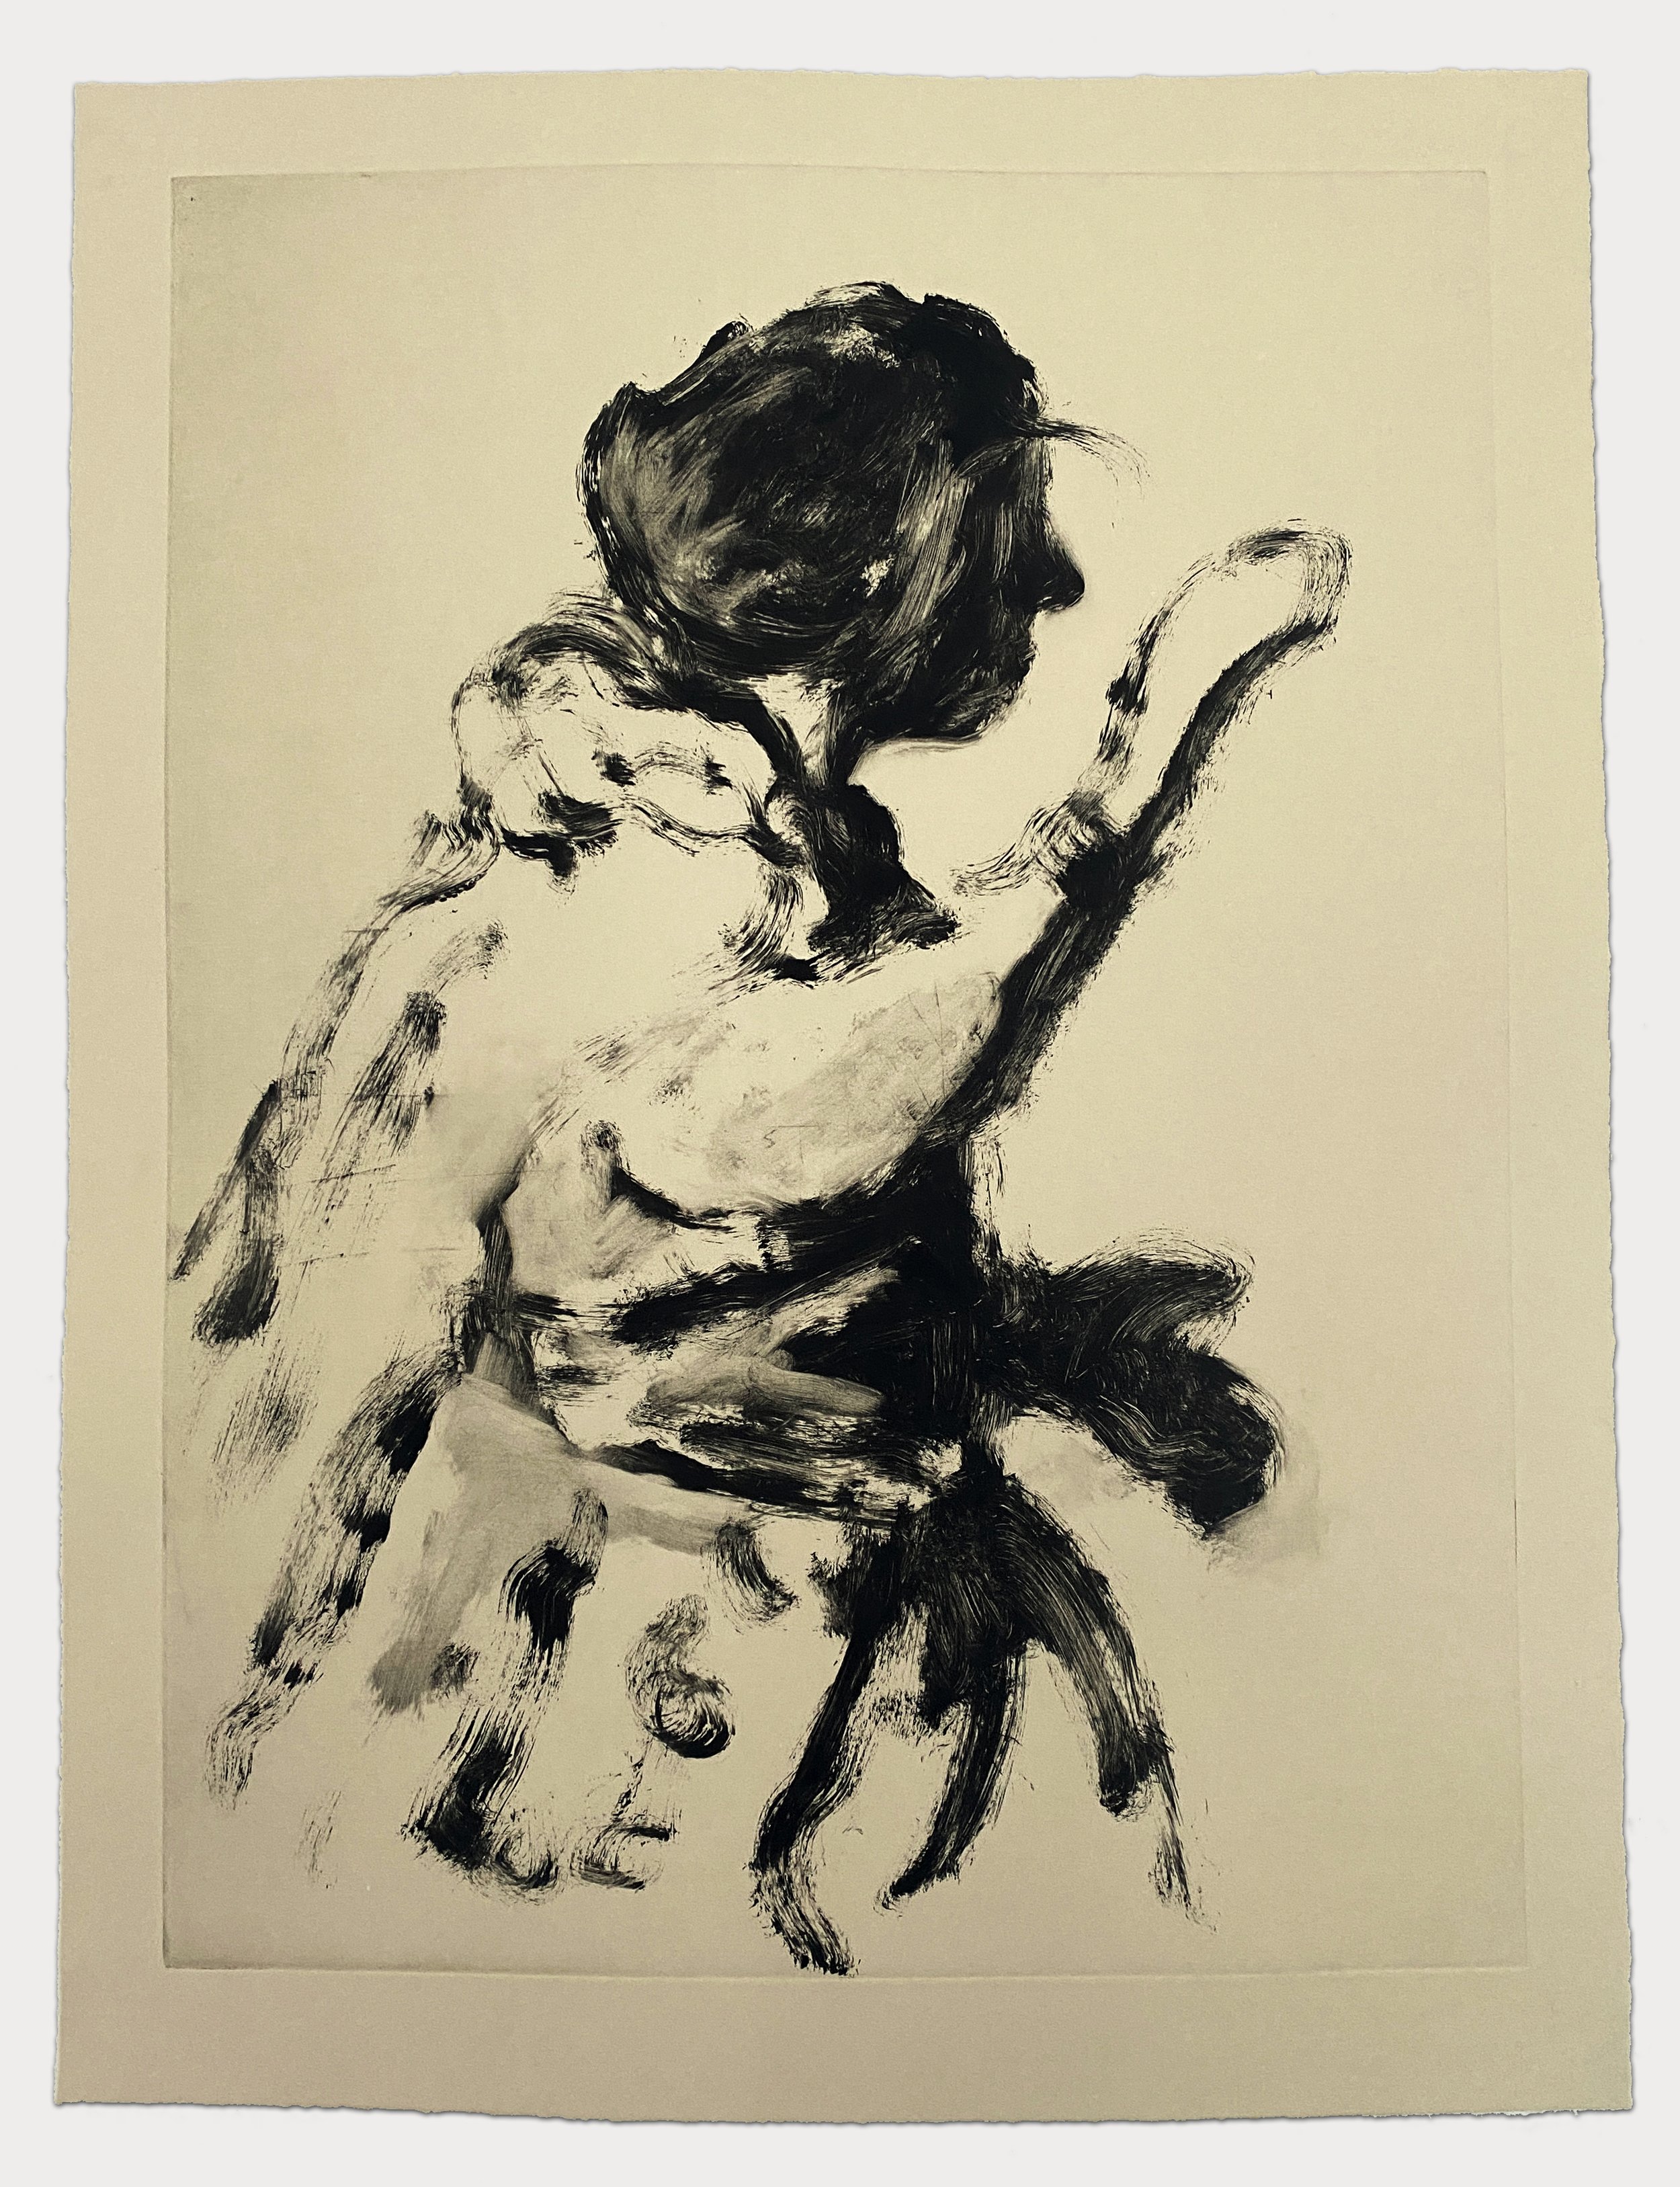 Your longing was stronger than his hard punishing word 2022 _ Monotype on paper 56x76cm _Liorah Tchiprout.jpg